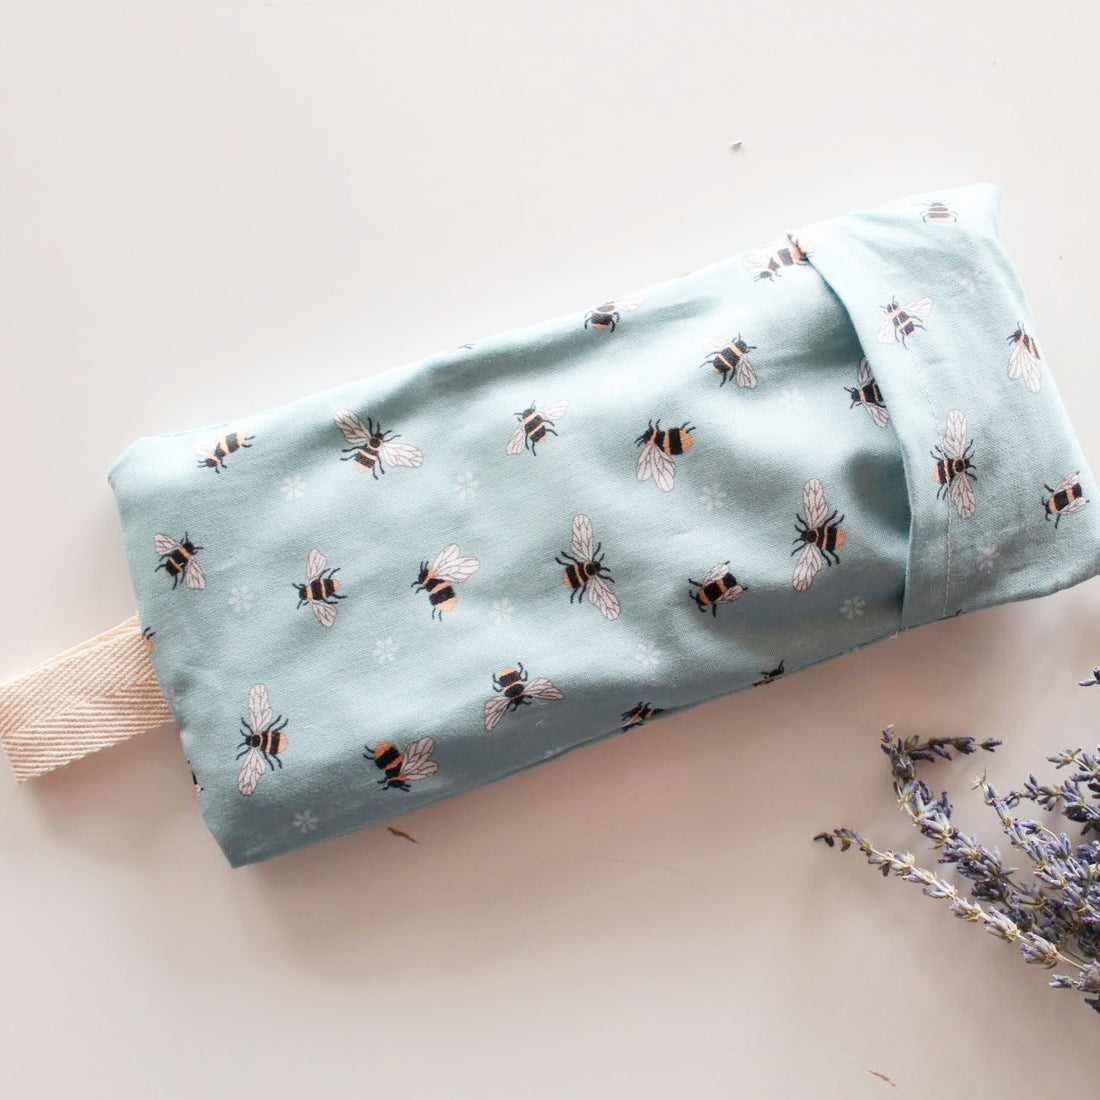 DIY eye pillow for yoga, mediation and relaxation instructions